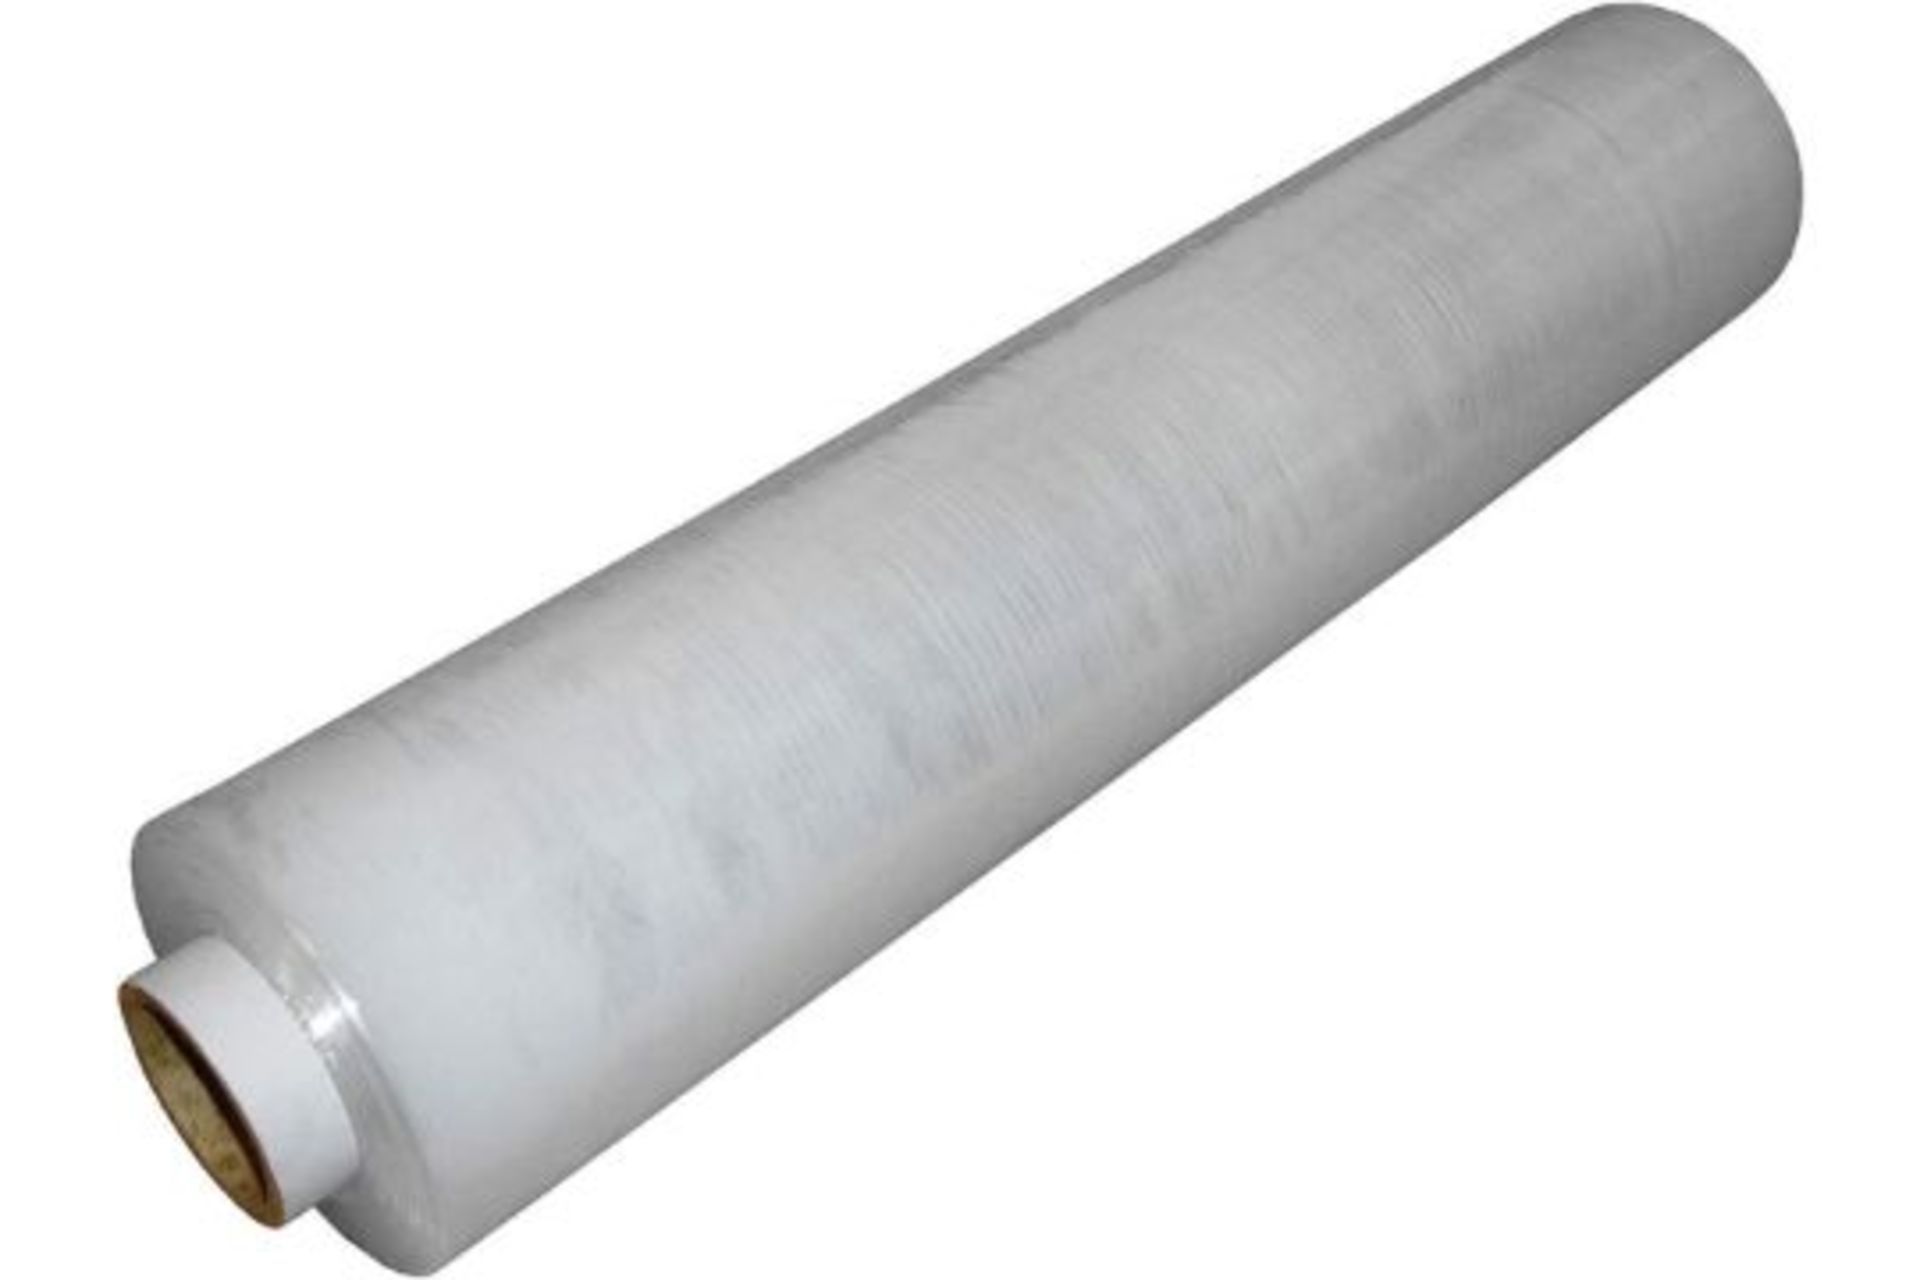 10 x NEW ROLLS OF 400MM CLEAR WRAP. 20 MICRON. 120M PER ROLL. (ROW17) - Image 2 of 2